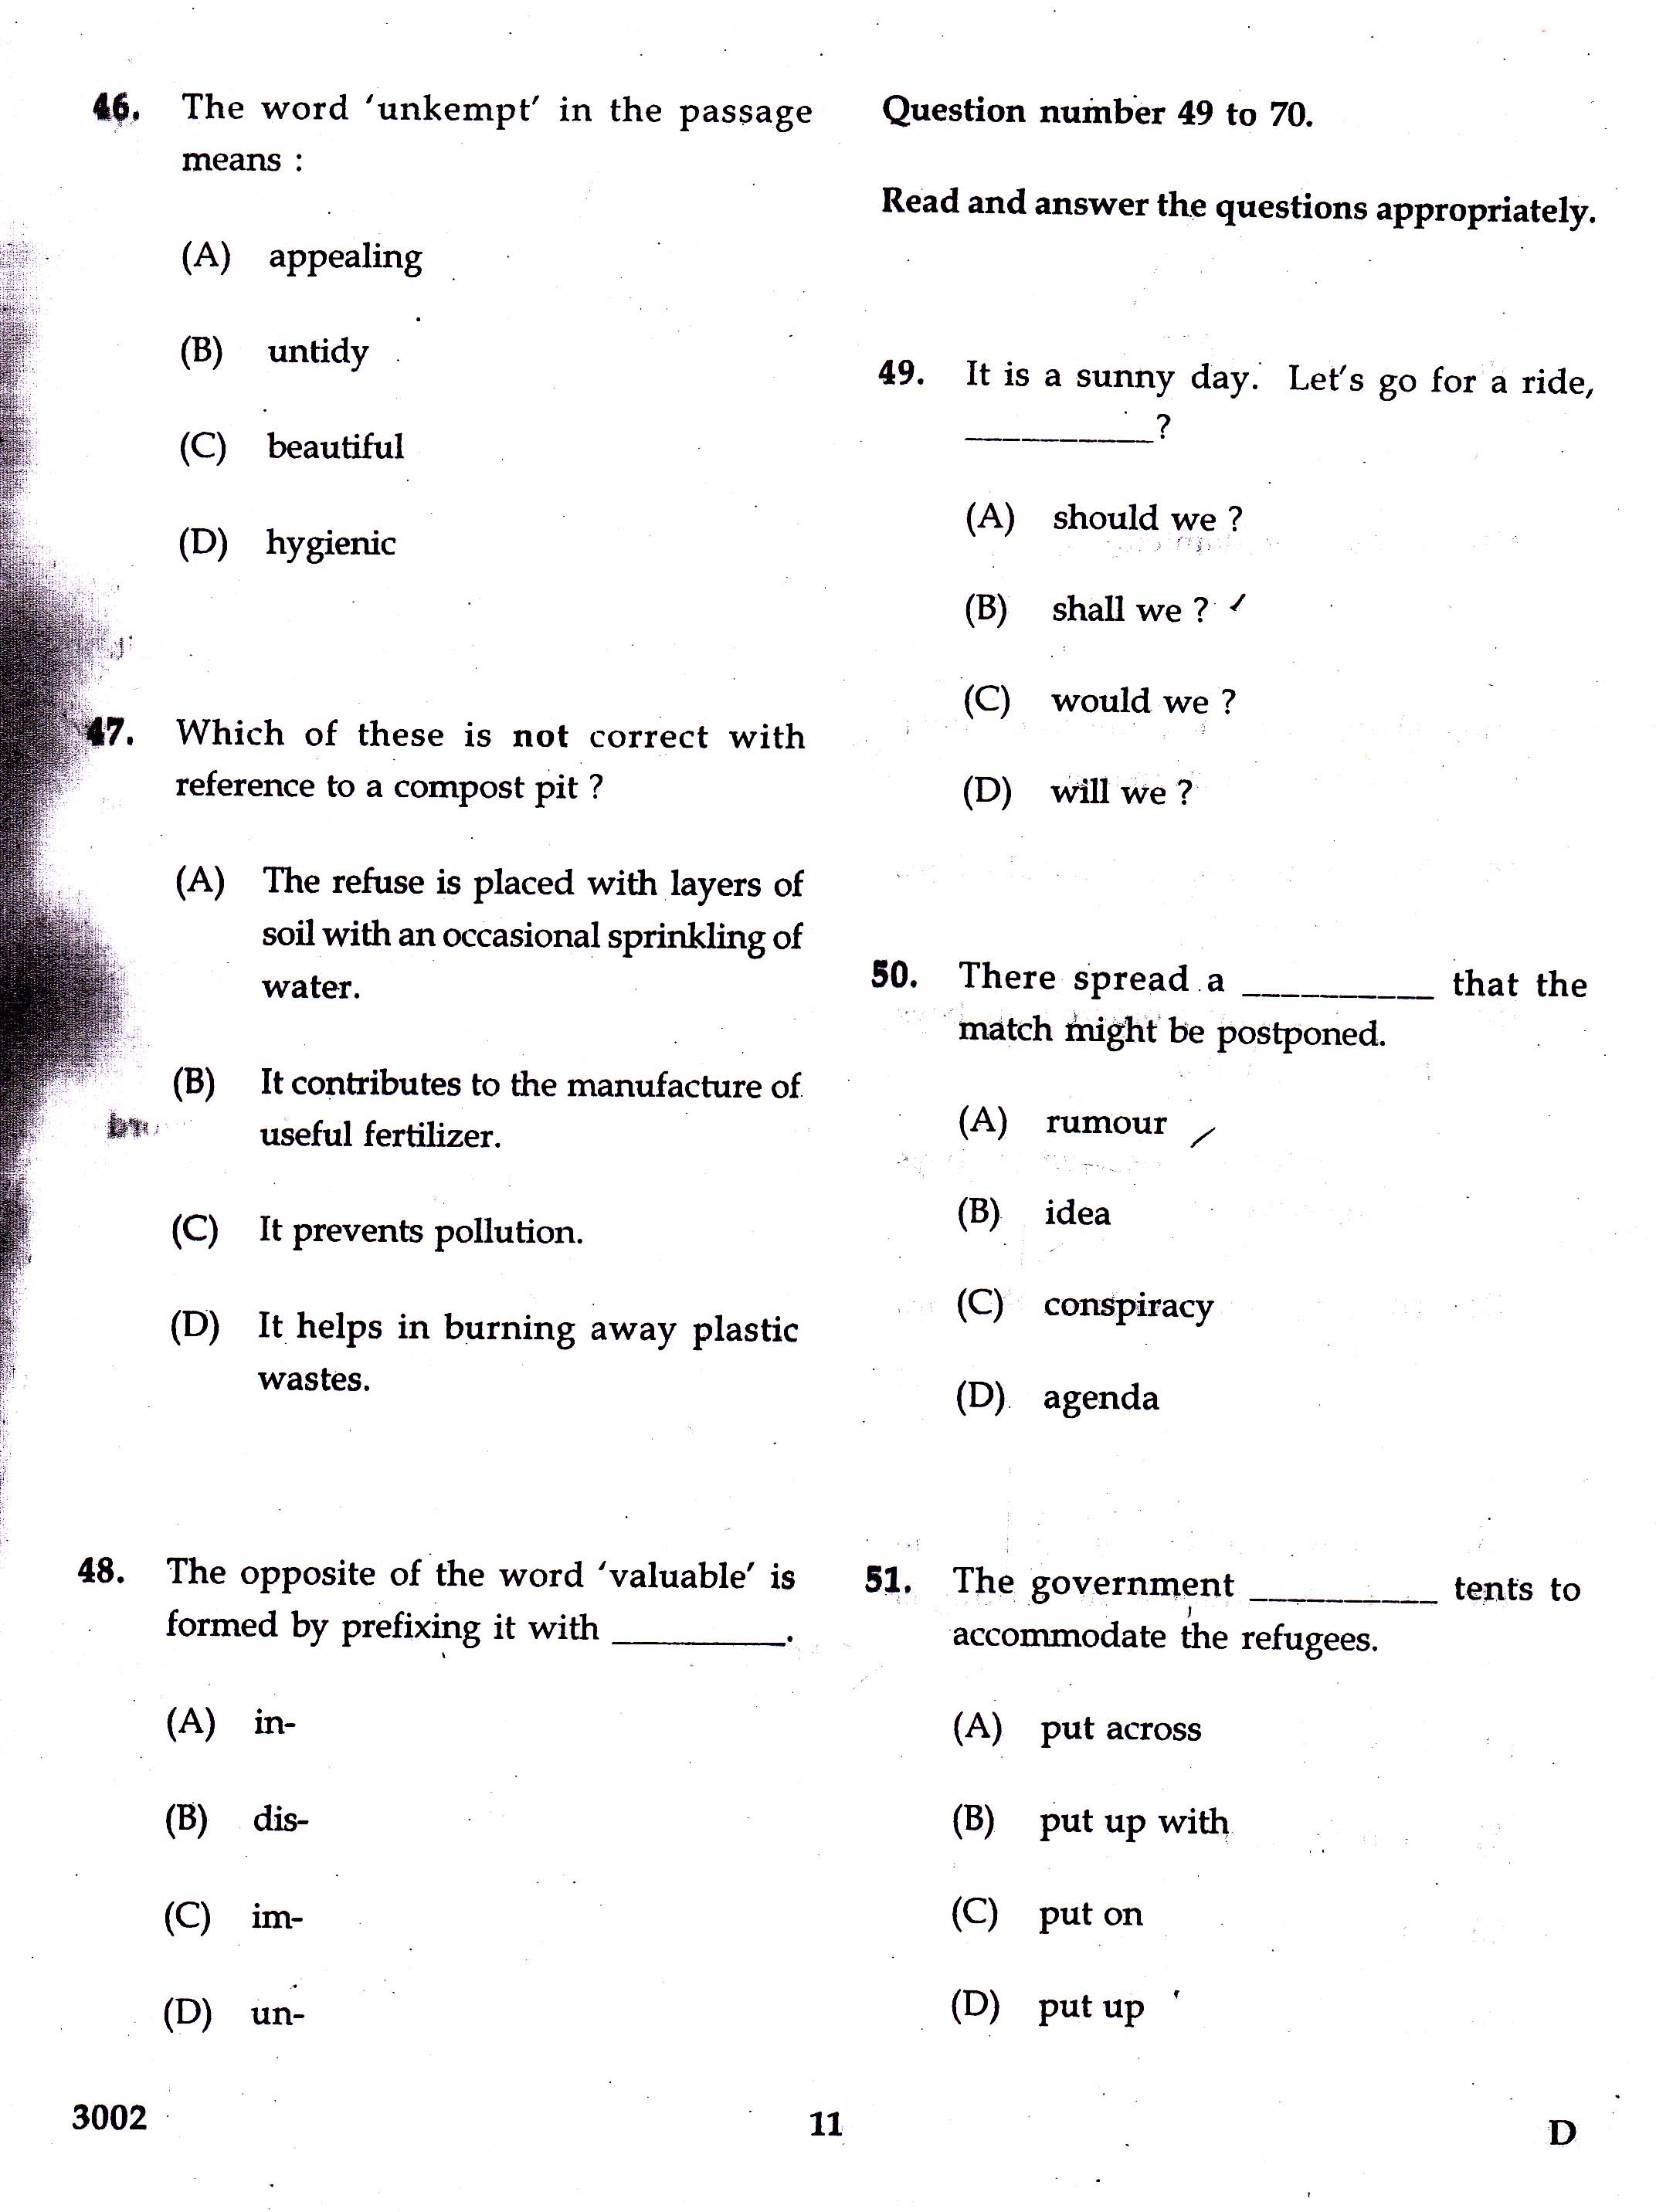 KTET Category III Part 2 English Question Paper with Answers 2017 2